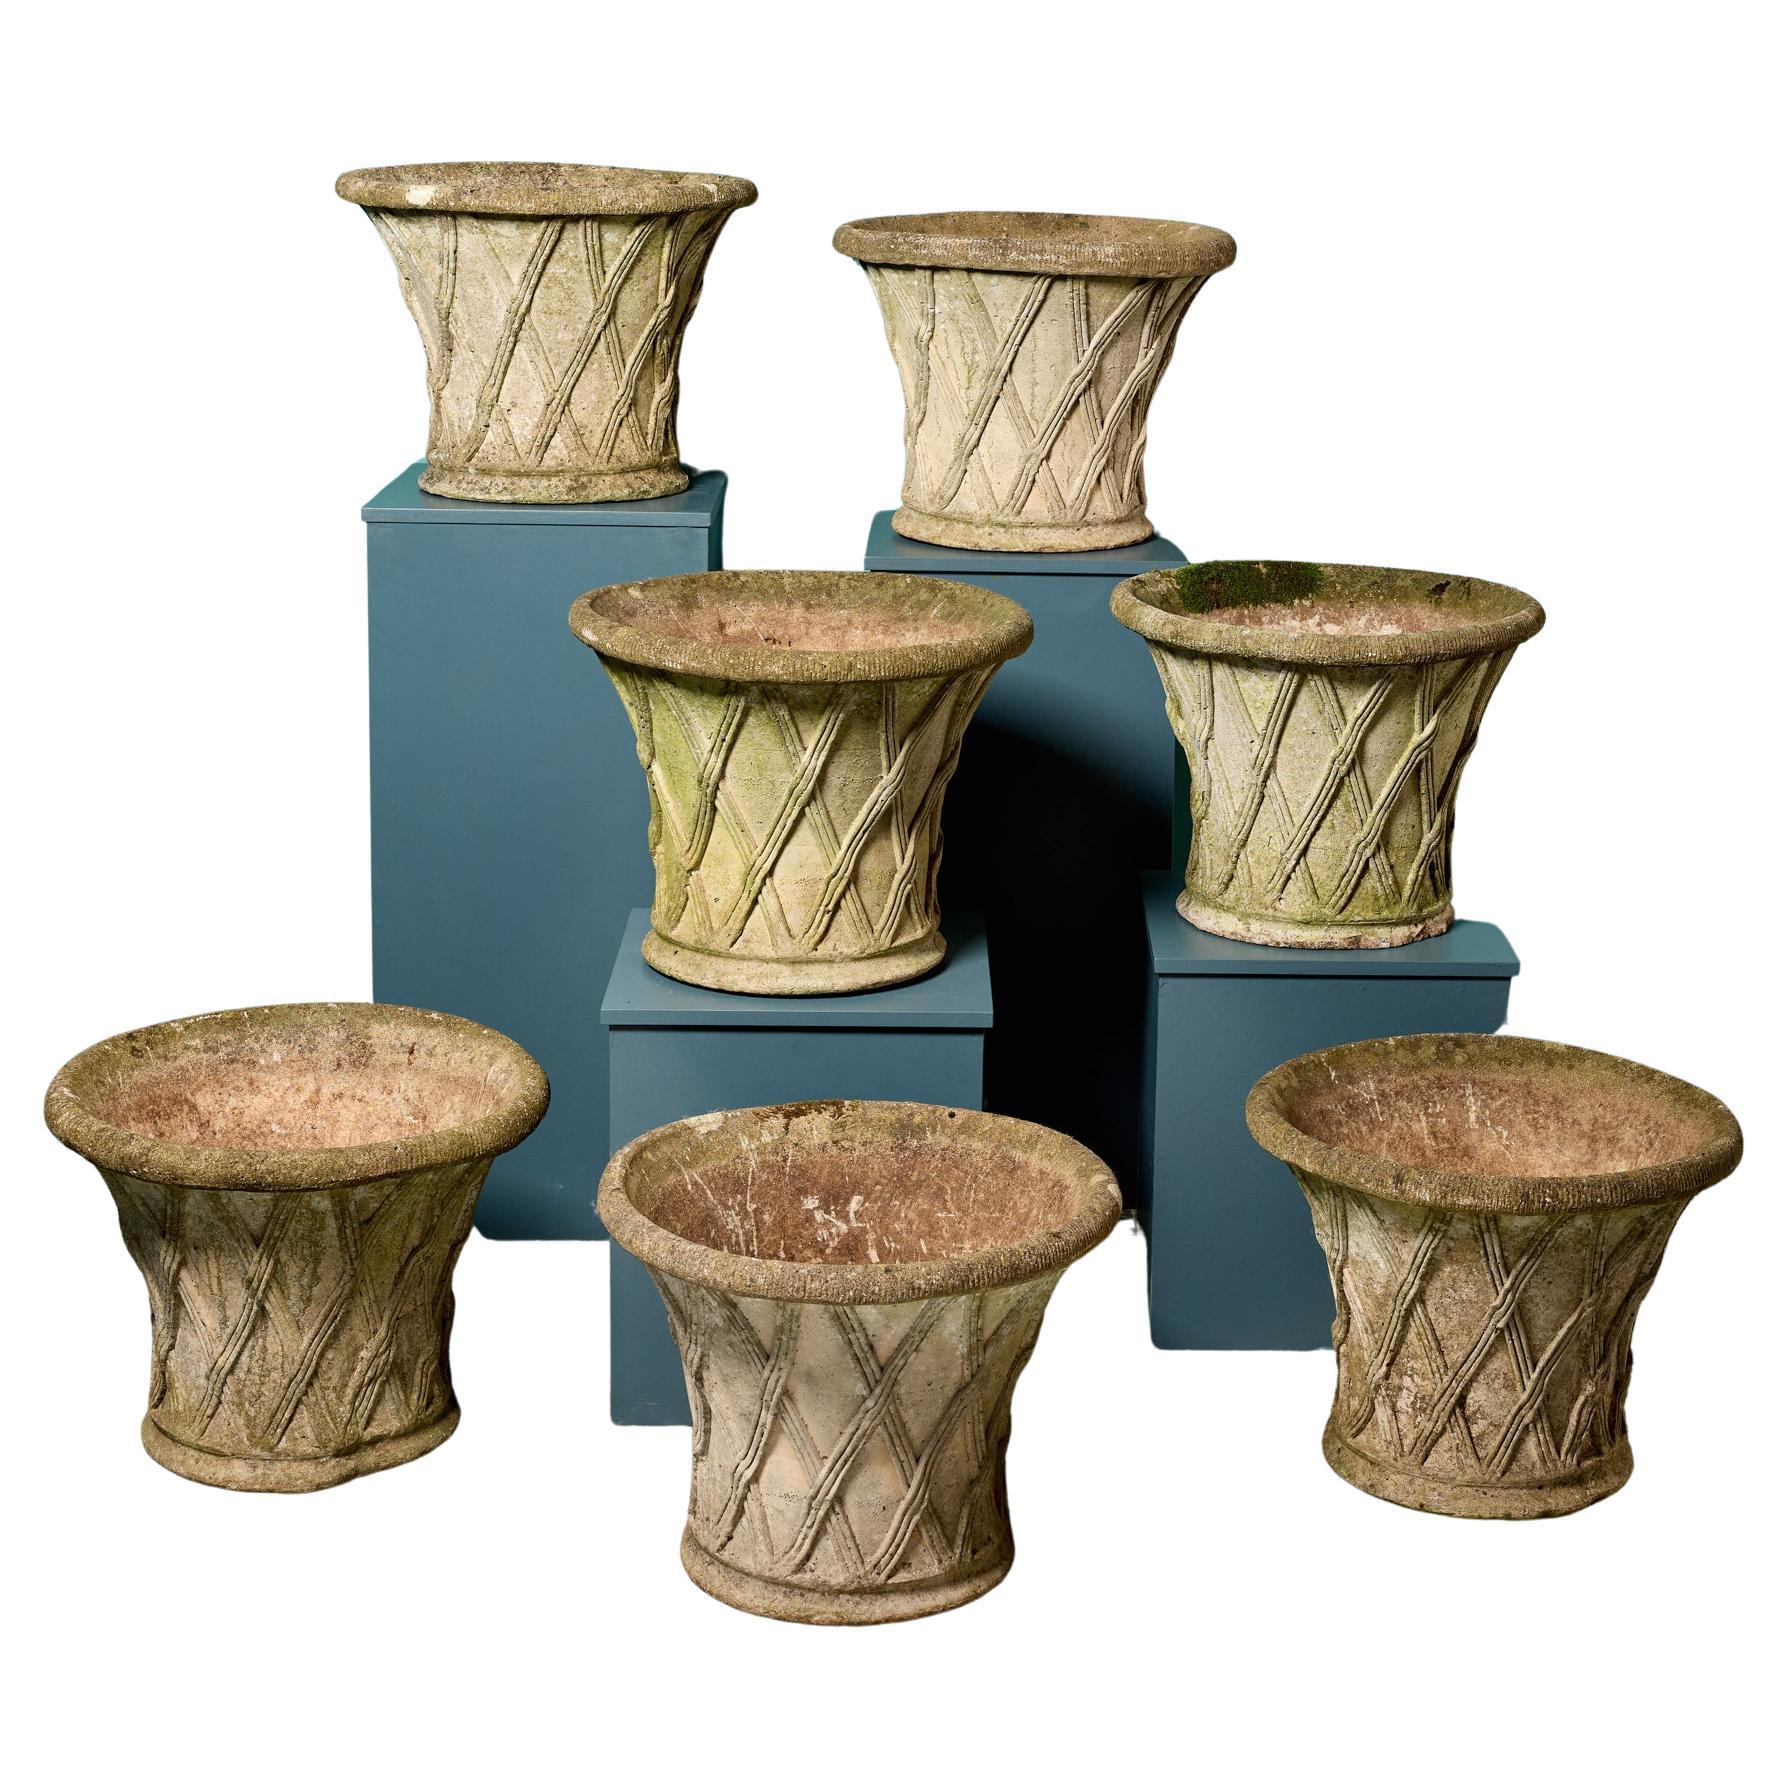 Set of Seven Reclaimed Stone Planters For Sale